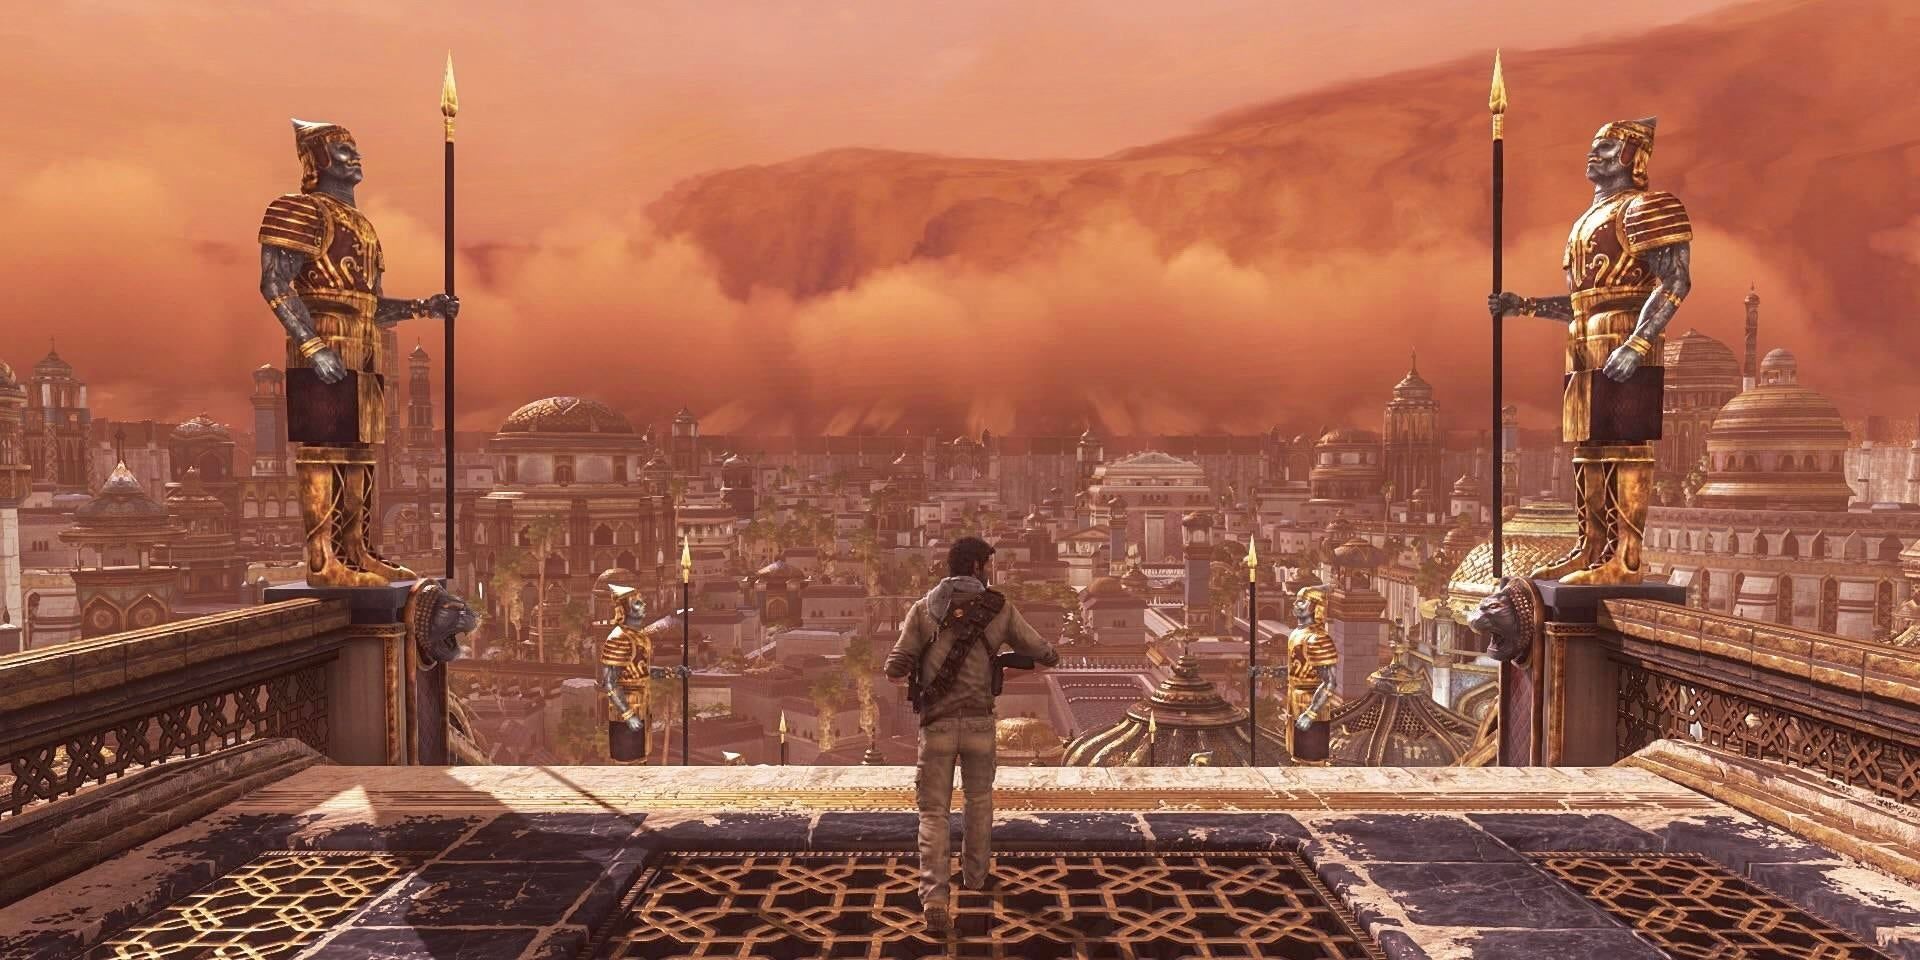 Ubar, Atlantis Of The Sands, in Uncharted